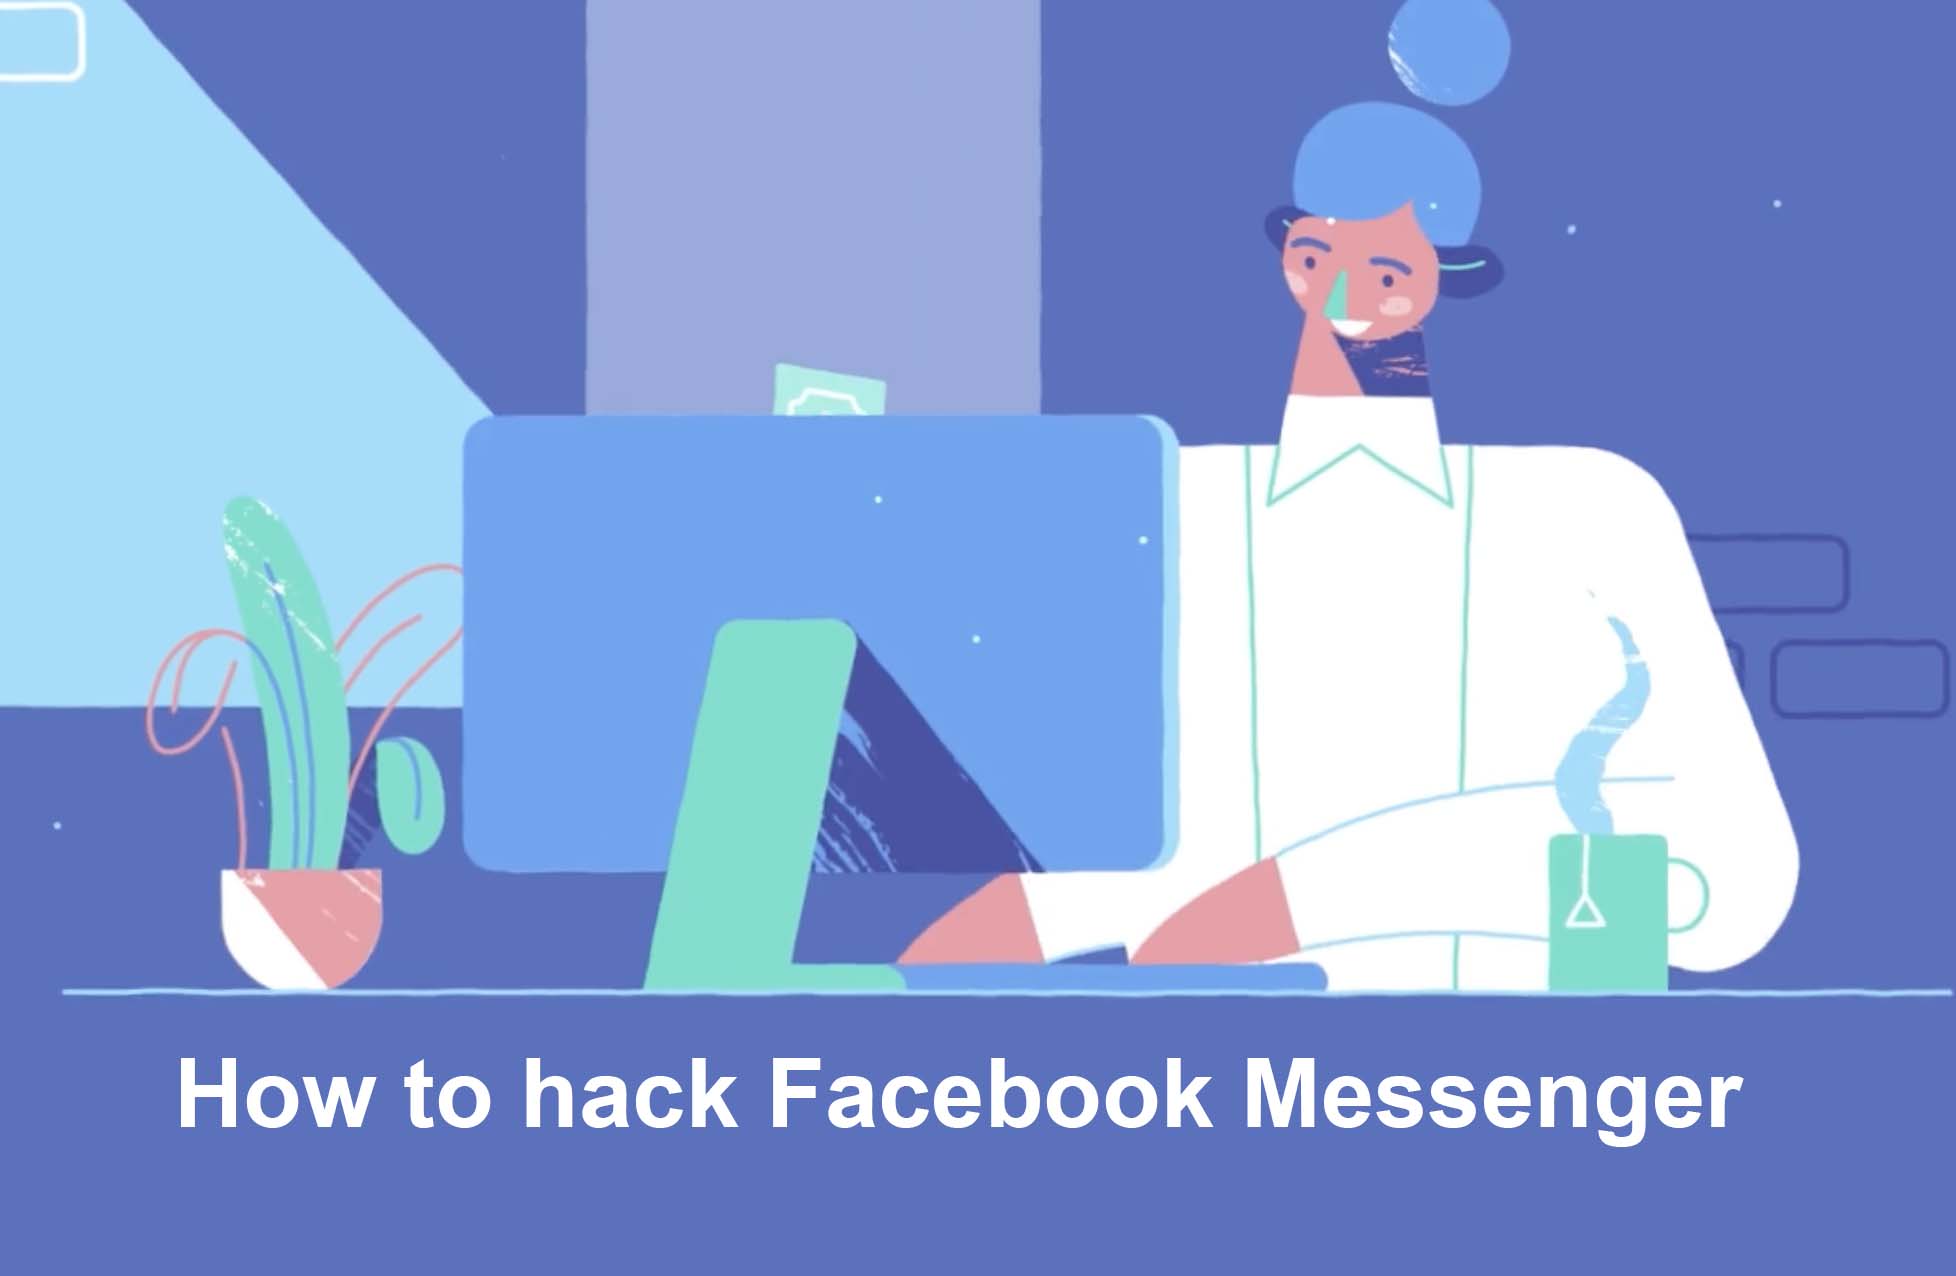 Hacking Facebook Messenger Without Password